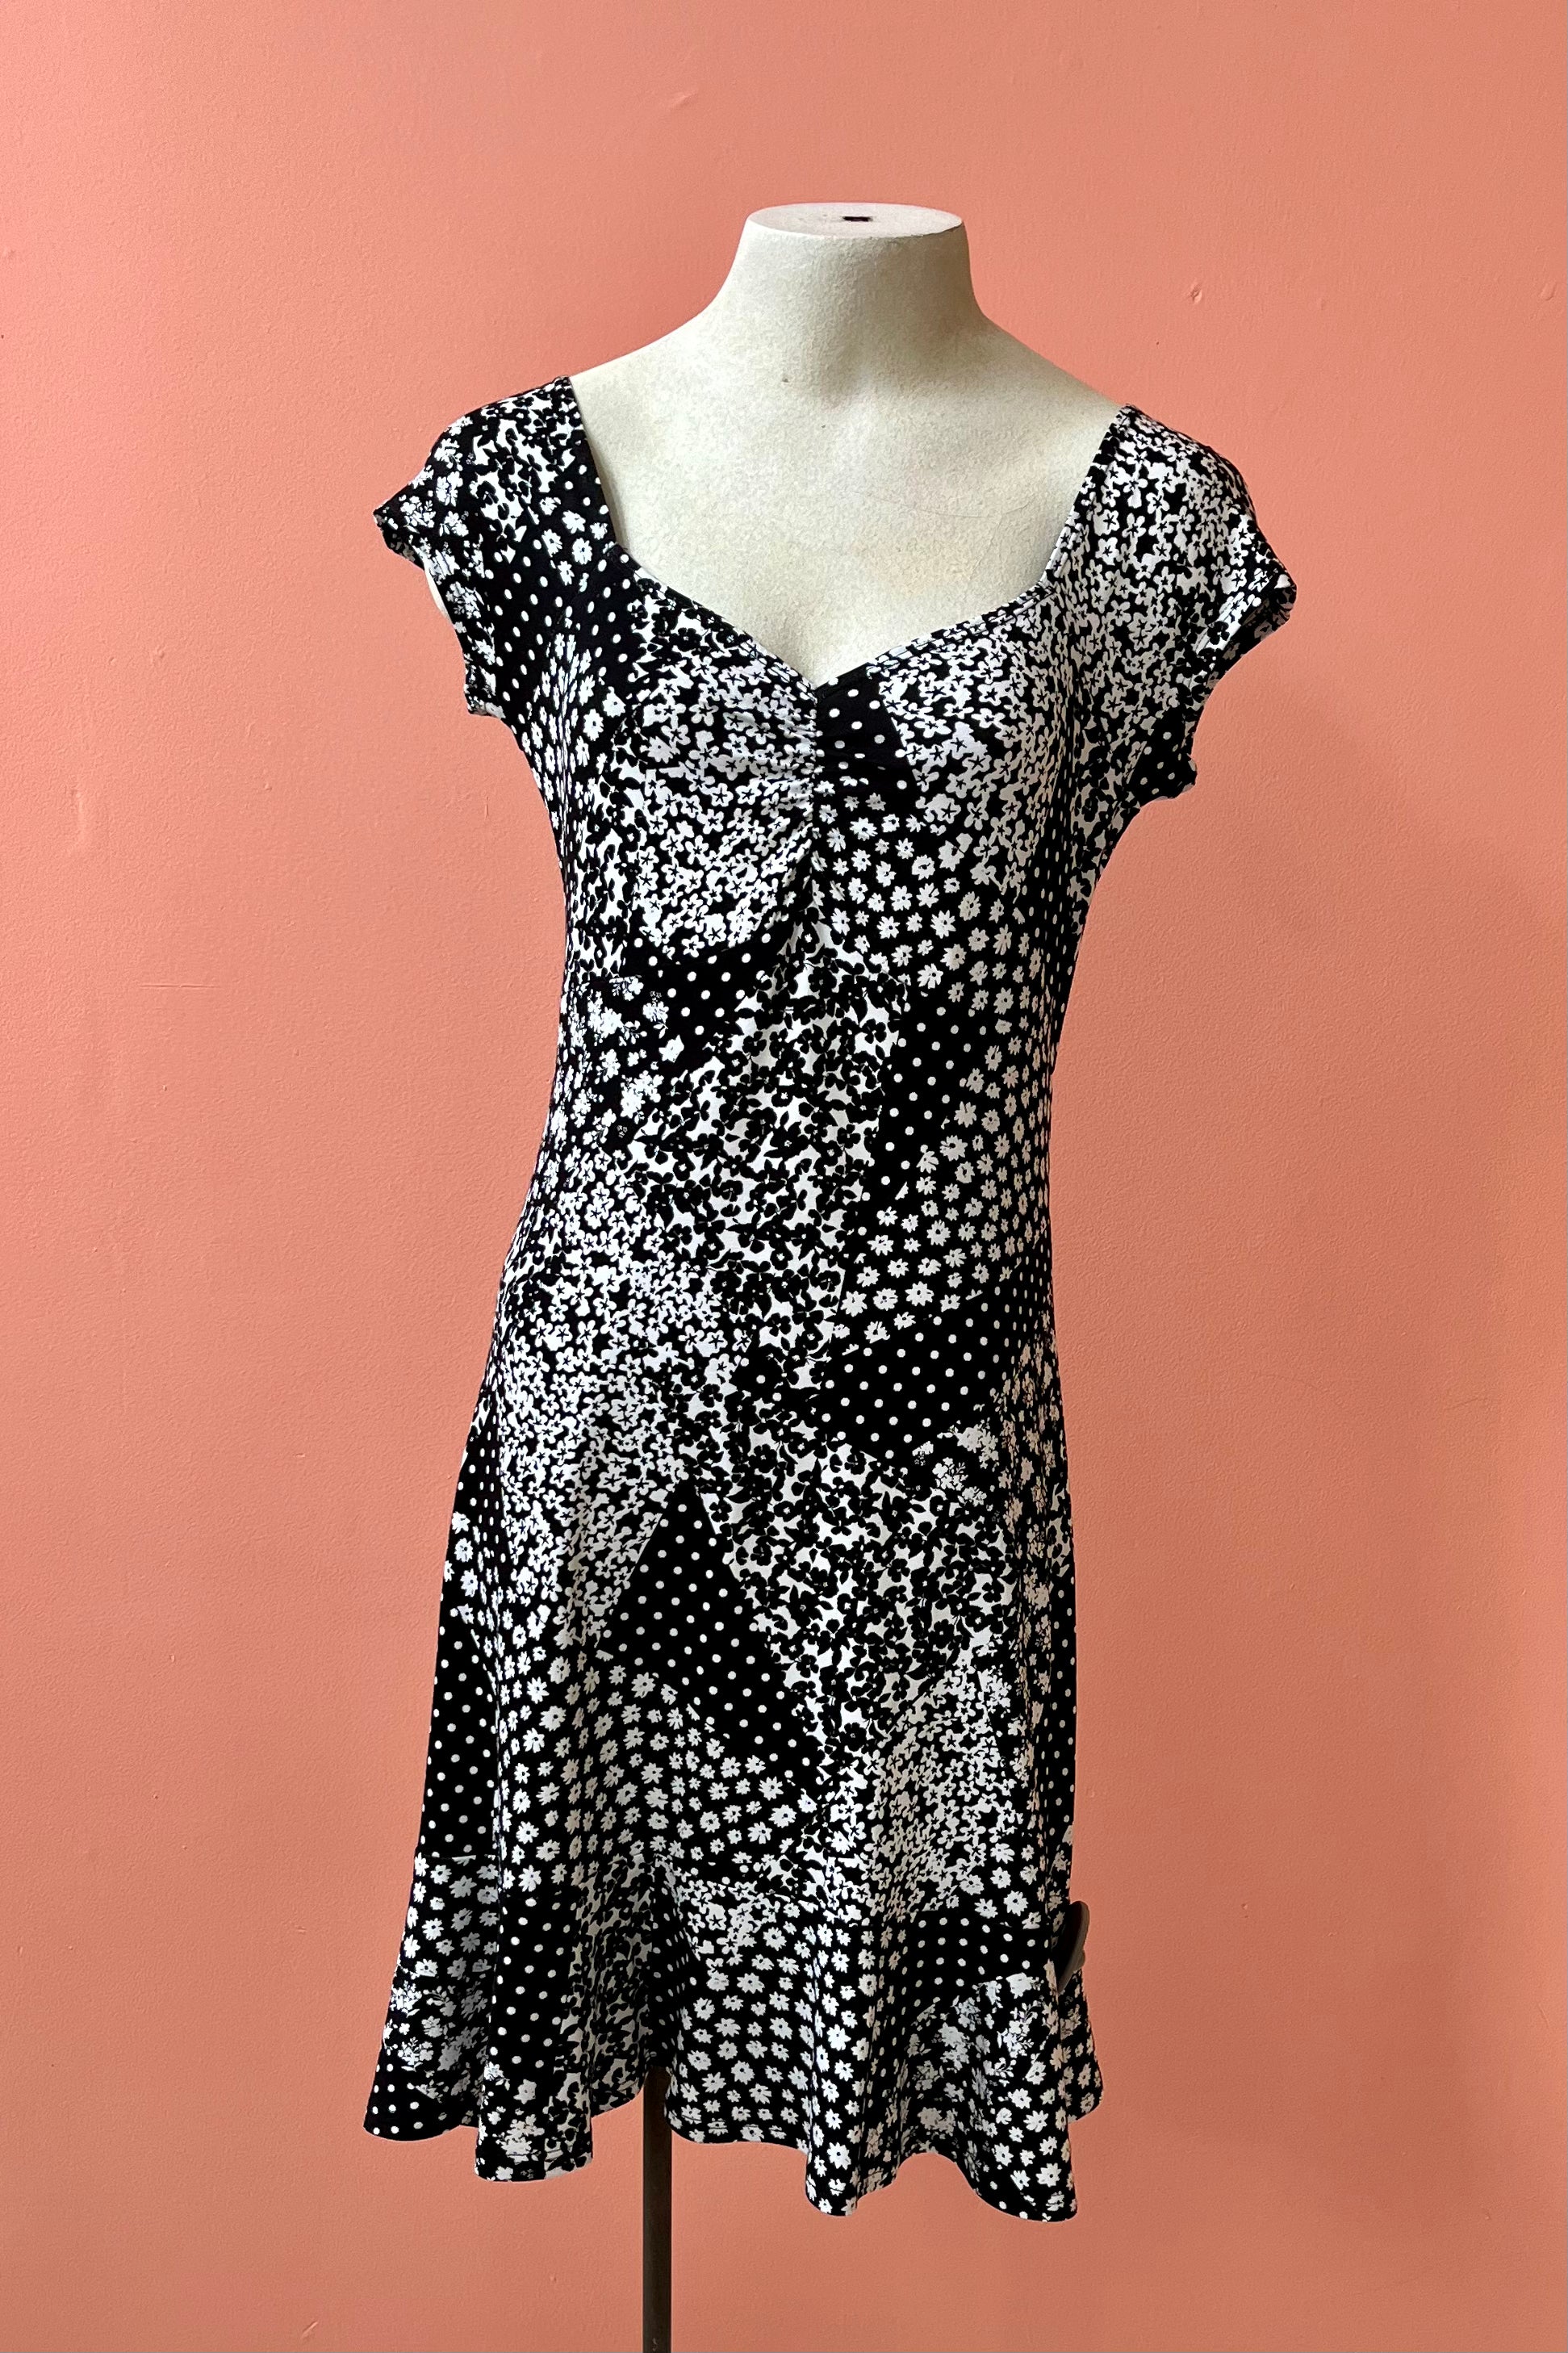 Lolita Dress by Luc Fontaine, black and white floral patchwork print, sweetheart neckline, cap sleees, fit and flare shape, ruffled hem, sizes 4-16, made in Montreal